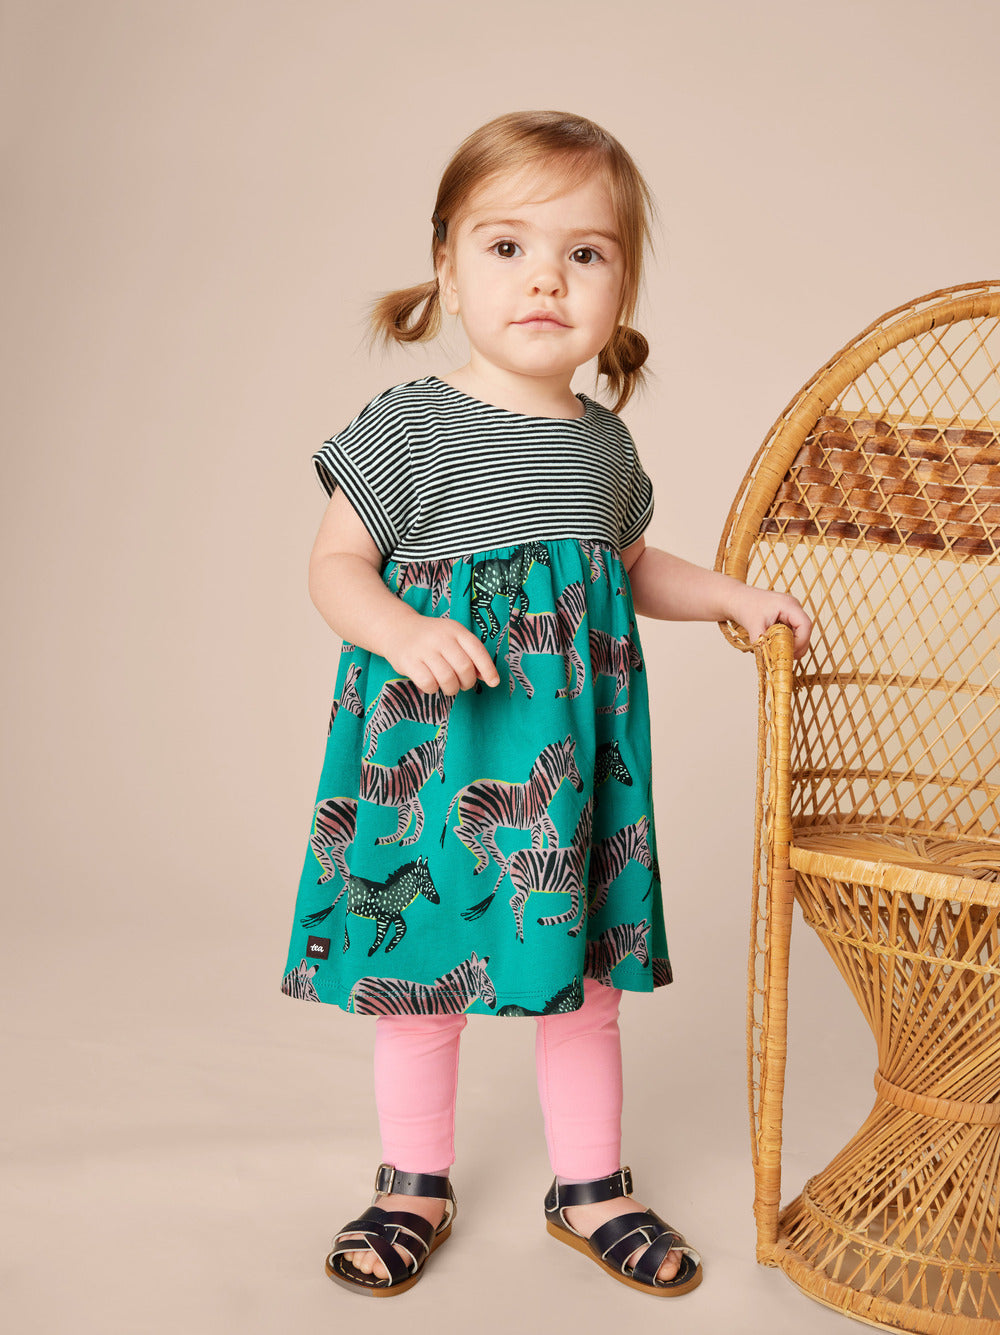 Mixed Print Empire Baby Dress: A Dazzle of Zebras